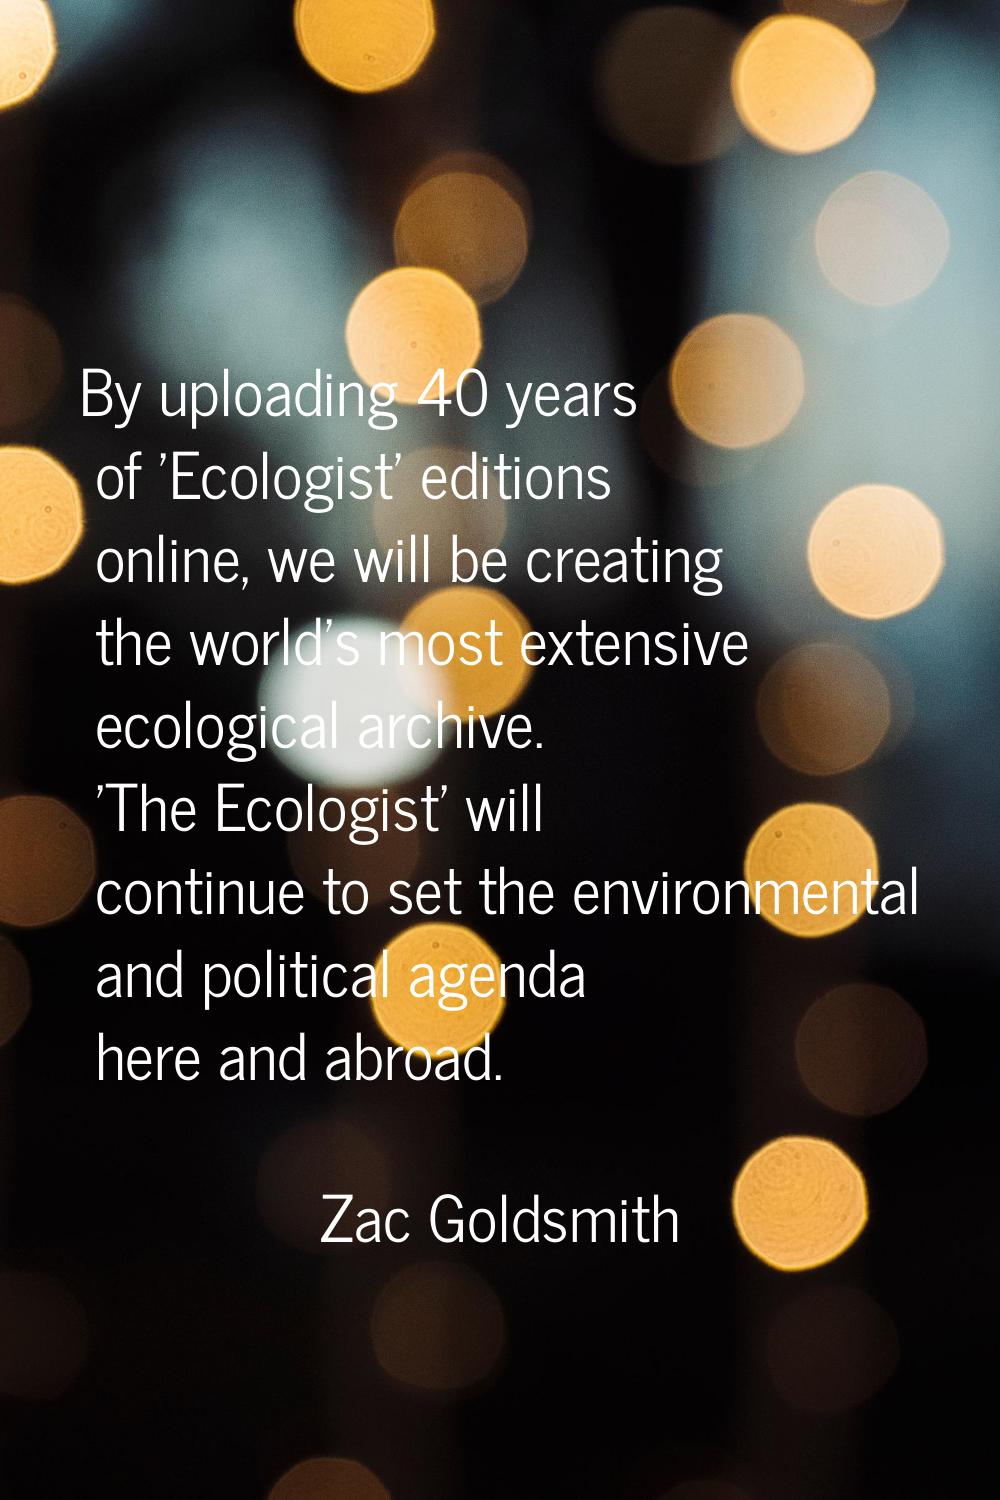 By uploading 40 years of 'Ecologist' editions online, we will be creating the world's most extensiv